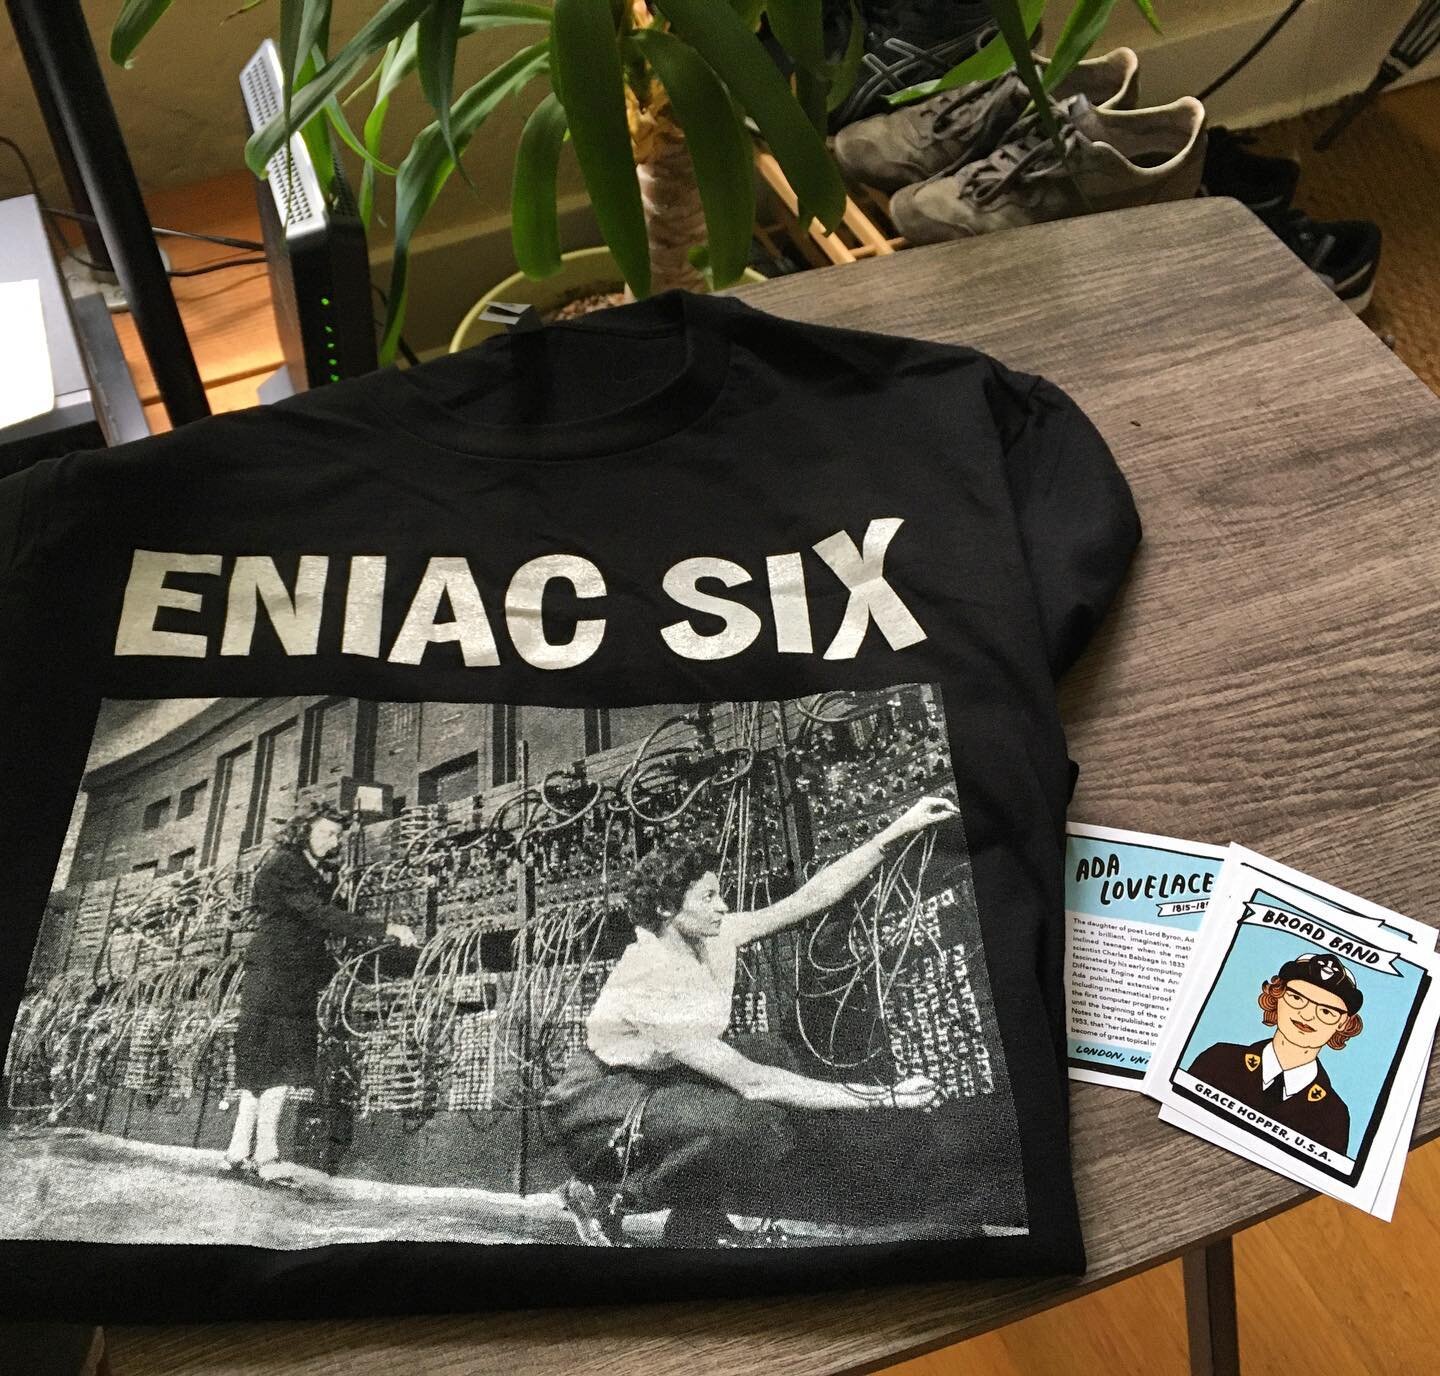 So excited for this badass shirt from @clairelevans, featuring the women &ldquo;computers&rdquo; of the ENIAC, the first digital general purpose computer.  The women in computing trading cards are a nice extra.